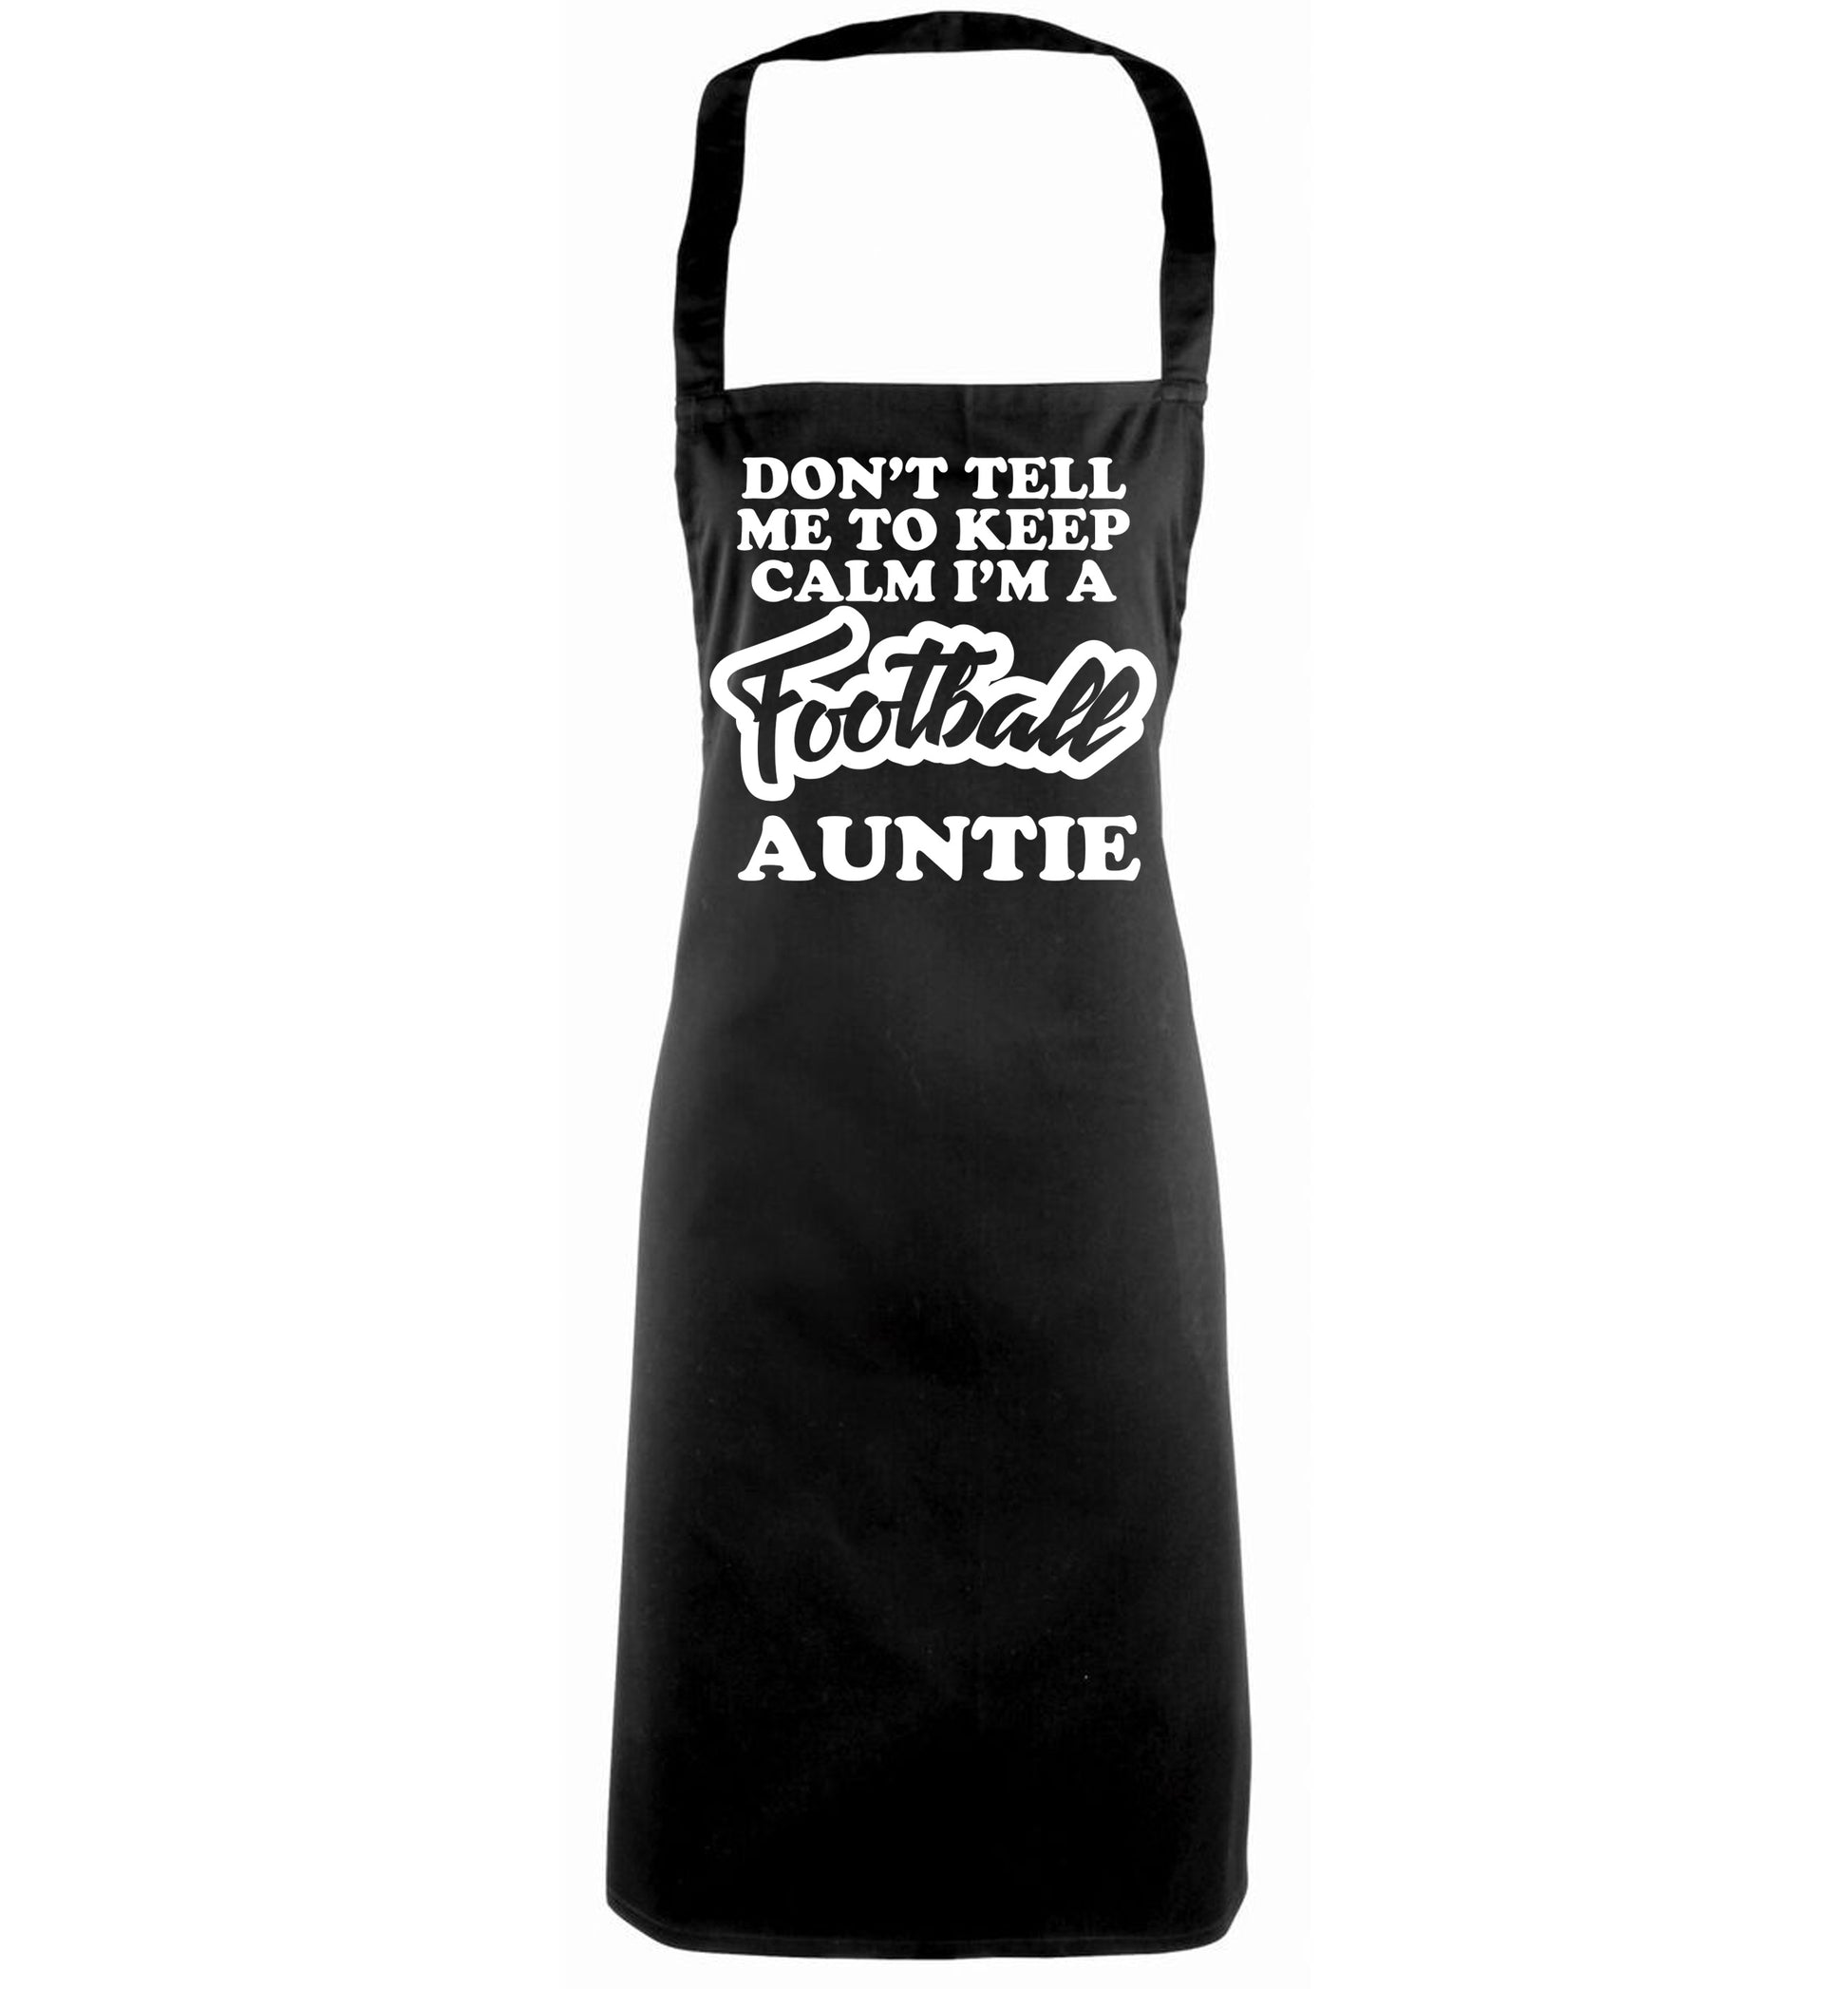 Don't tell me to keep calm I'm a football auntie black apron